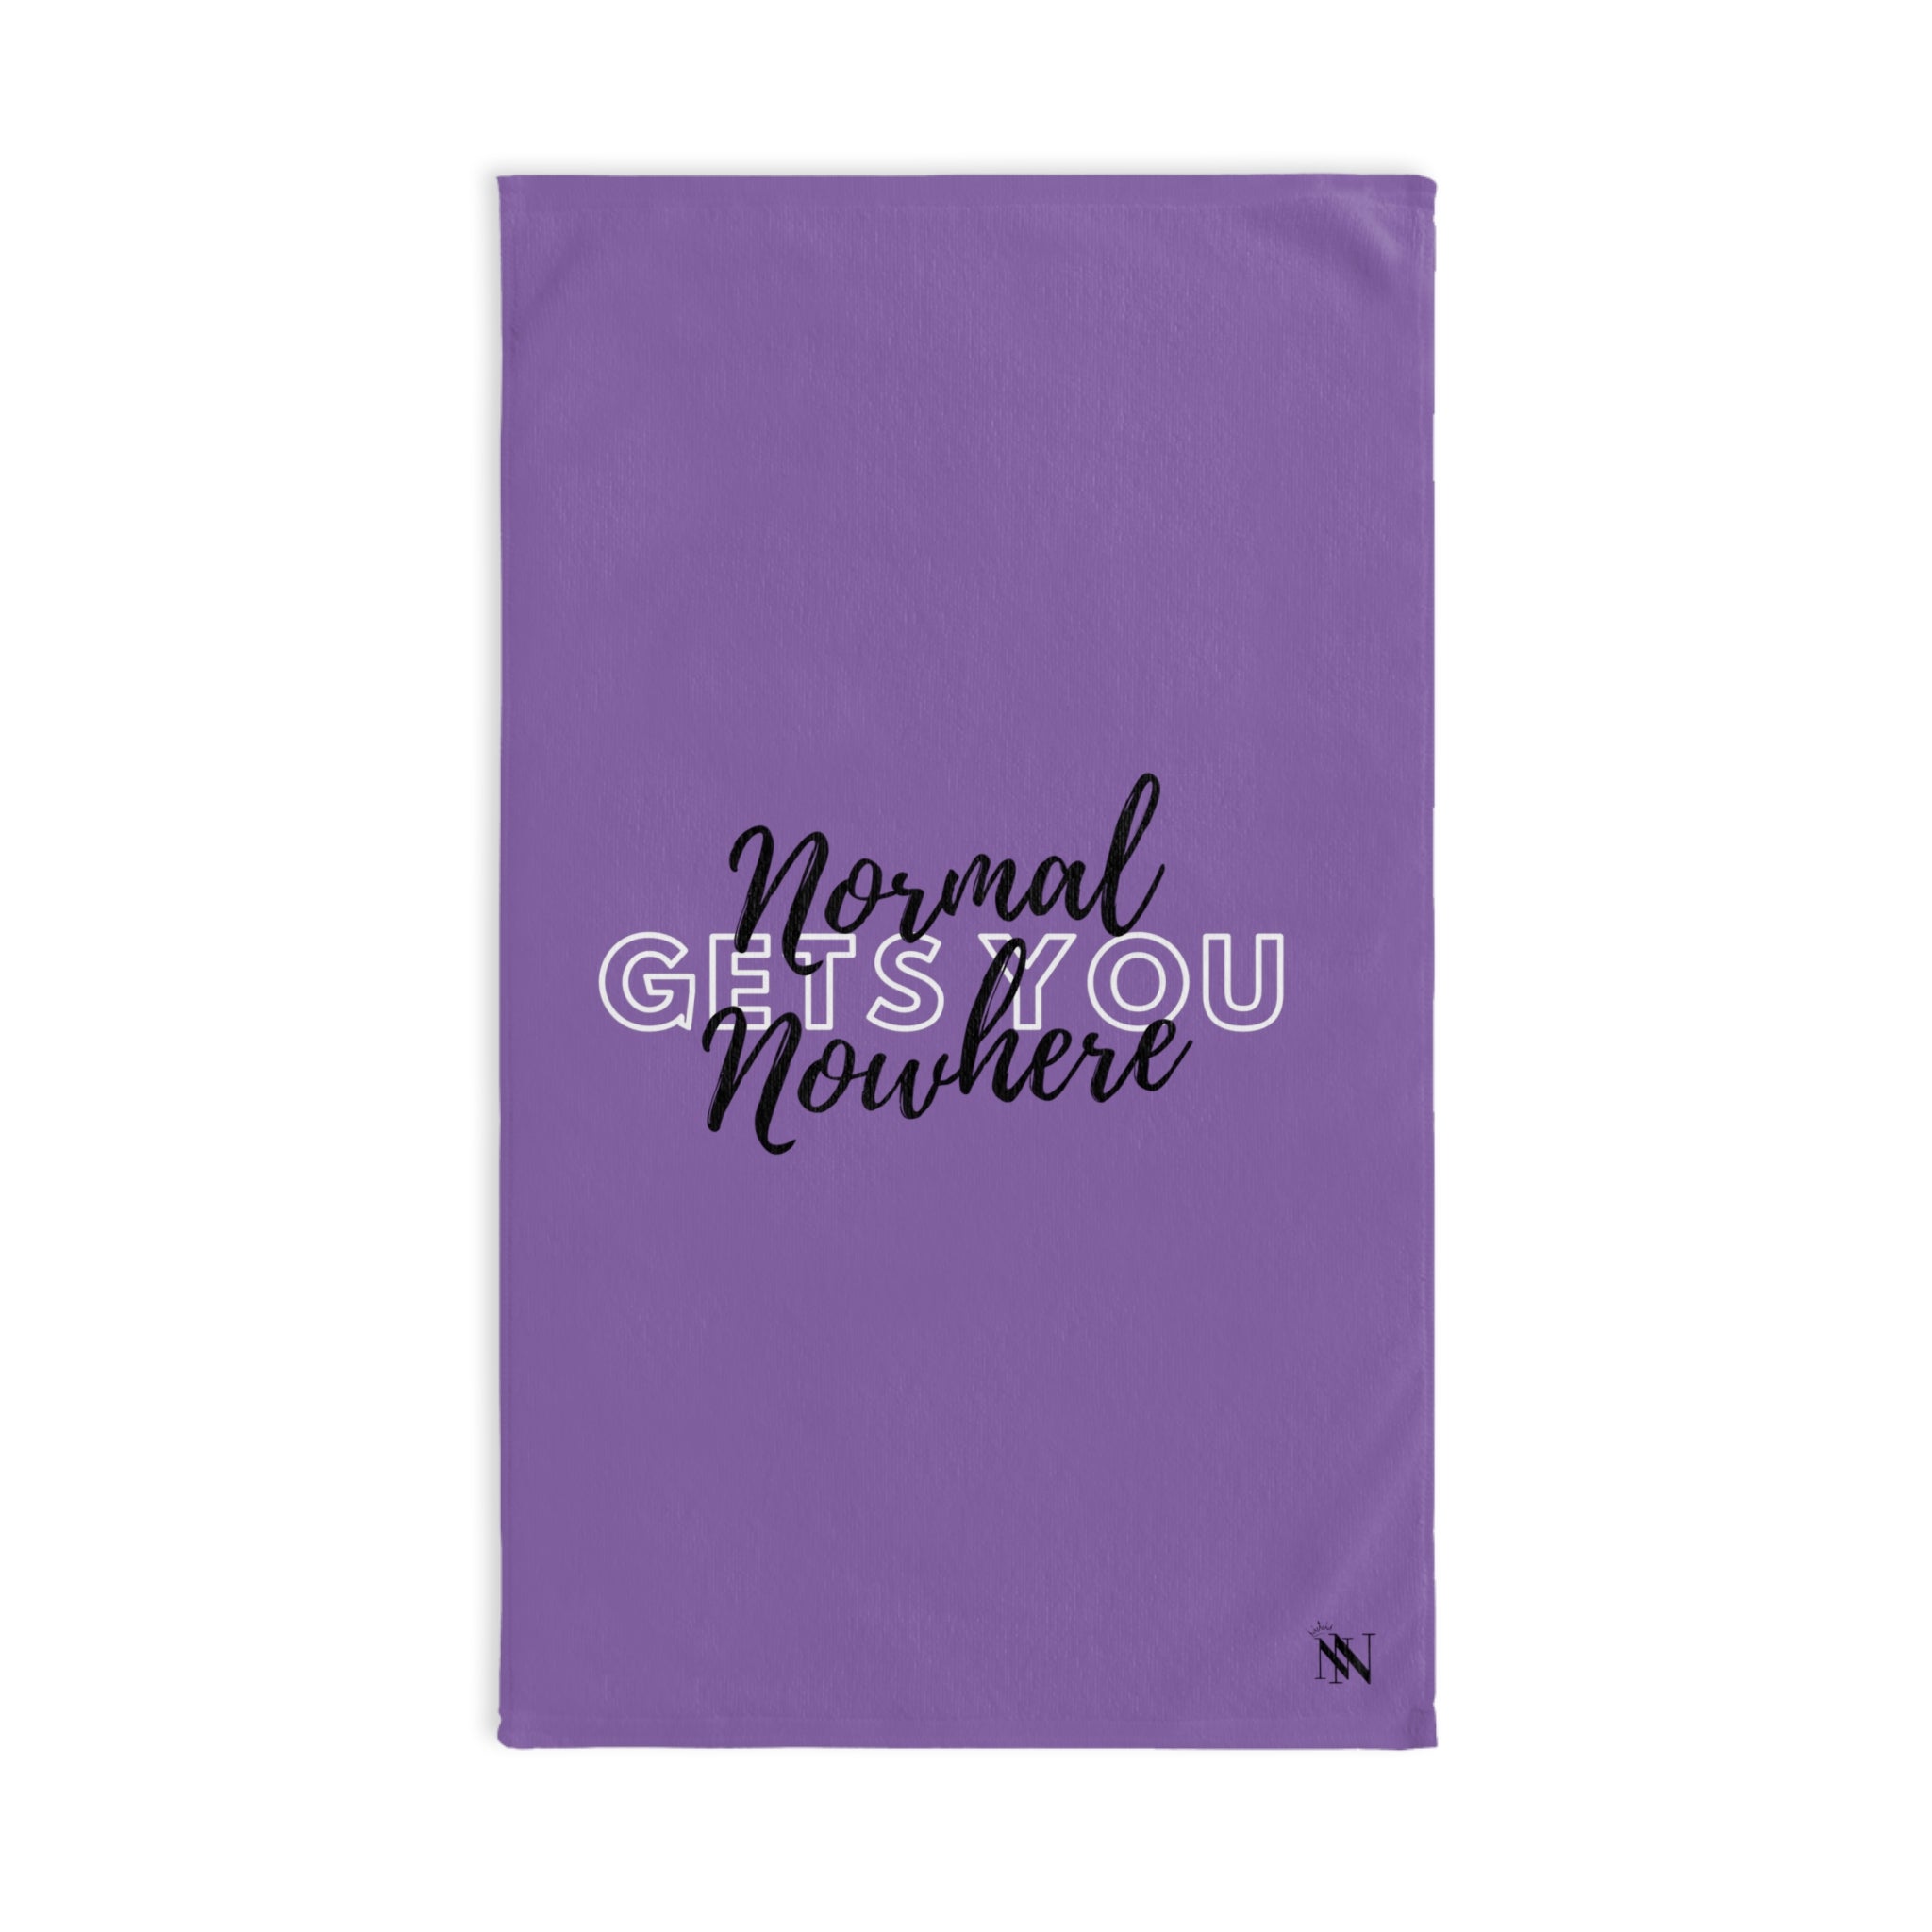 Normal Nowhere Lavendar | Funny Gifts for Men - Gifts for Him - Birthday Gifts for Men, Him, Husband, Boyfriend, New Couple Gifts, Fathers & Valentines Day Gifts, Hand Towels NECTAR NAPKINS